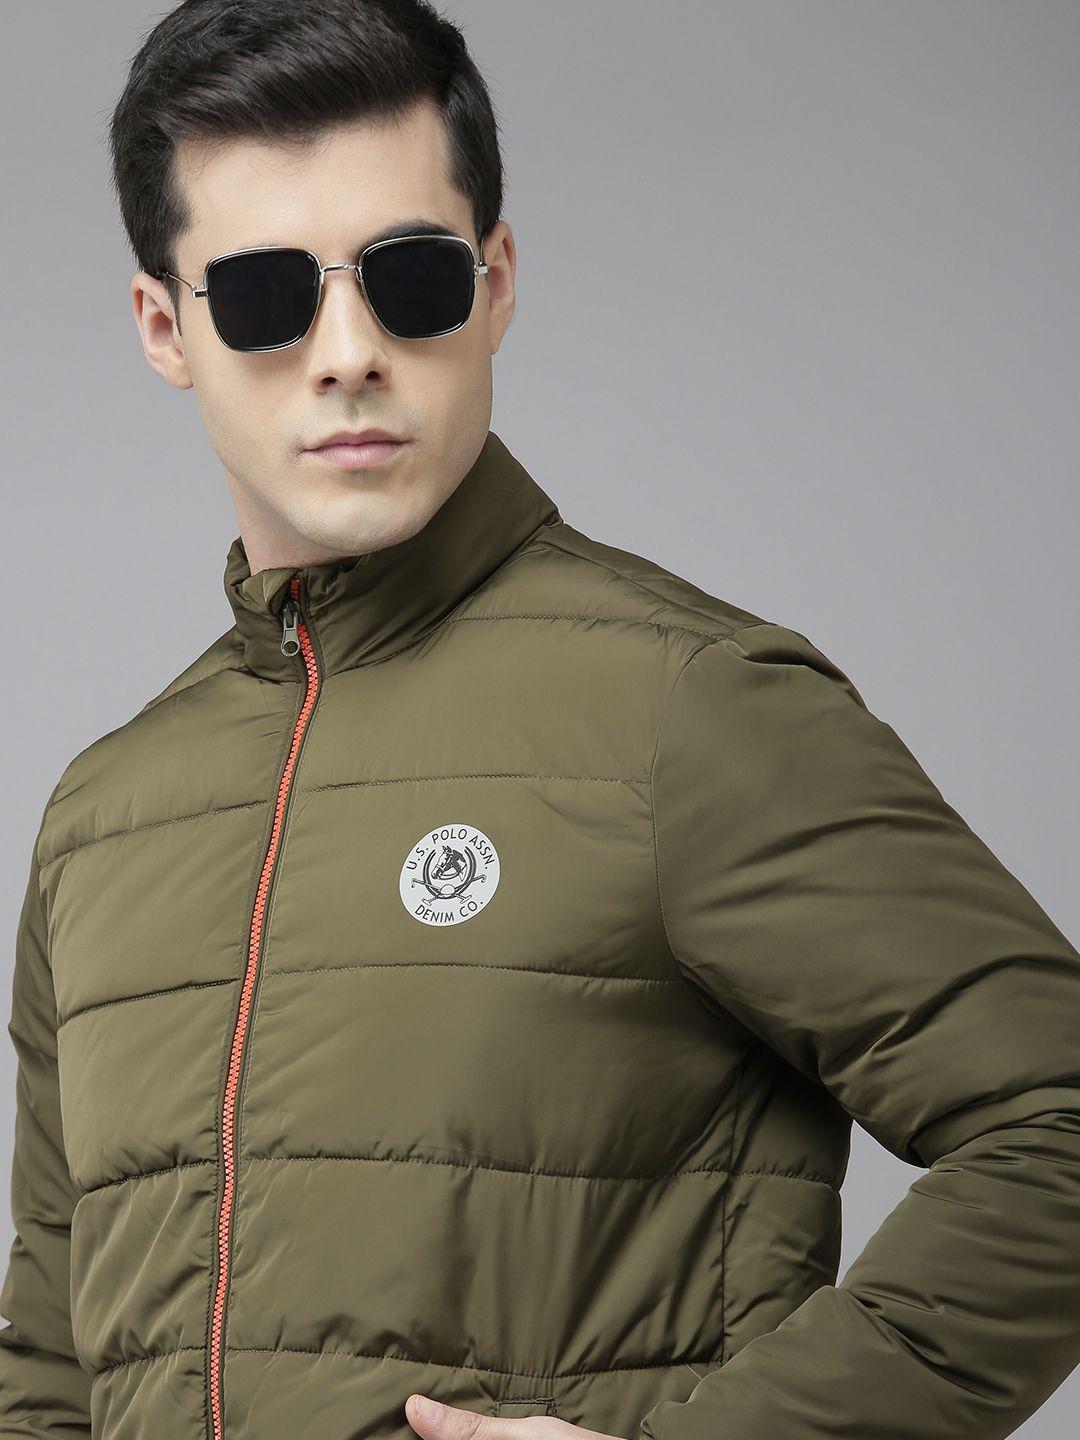 u s polo assn denim co men olive green solid puffer jacket with brand logo detail